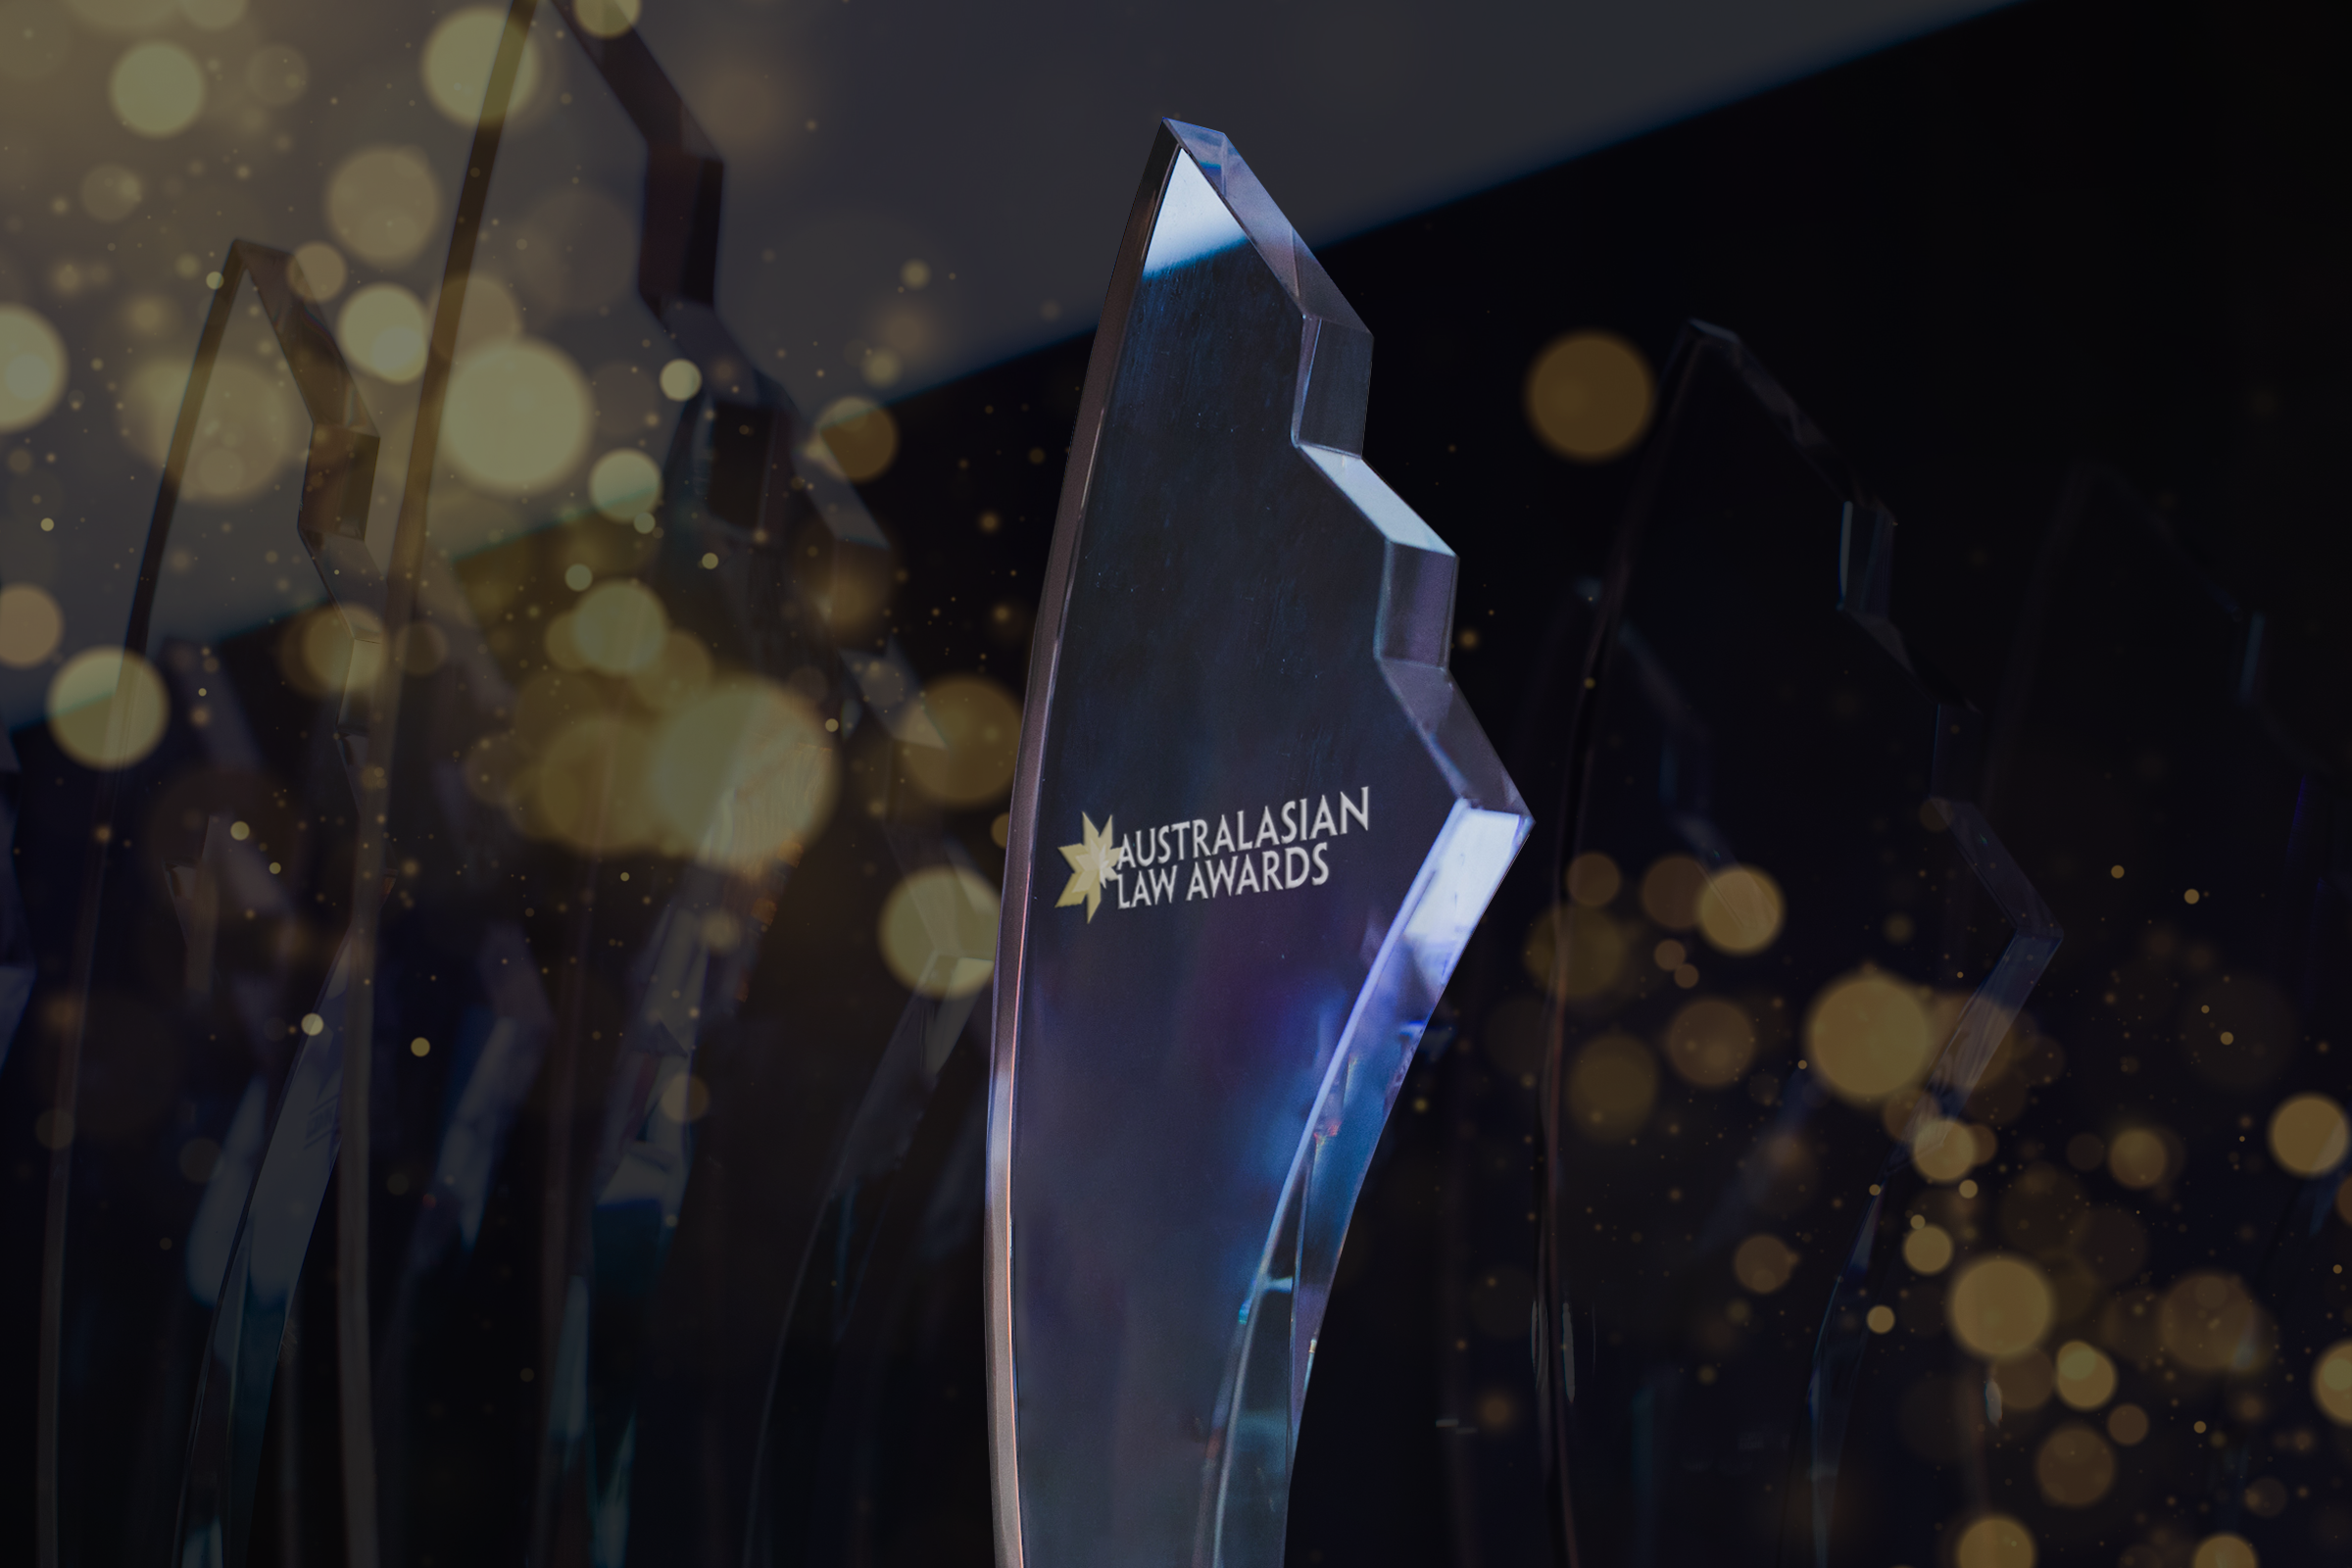 Australasian Law Awards 2021 crowns the winners of the deal categories